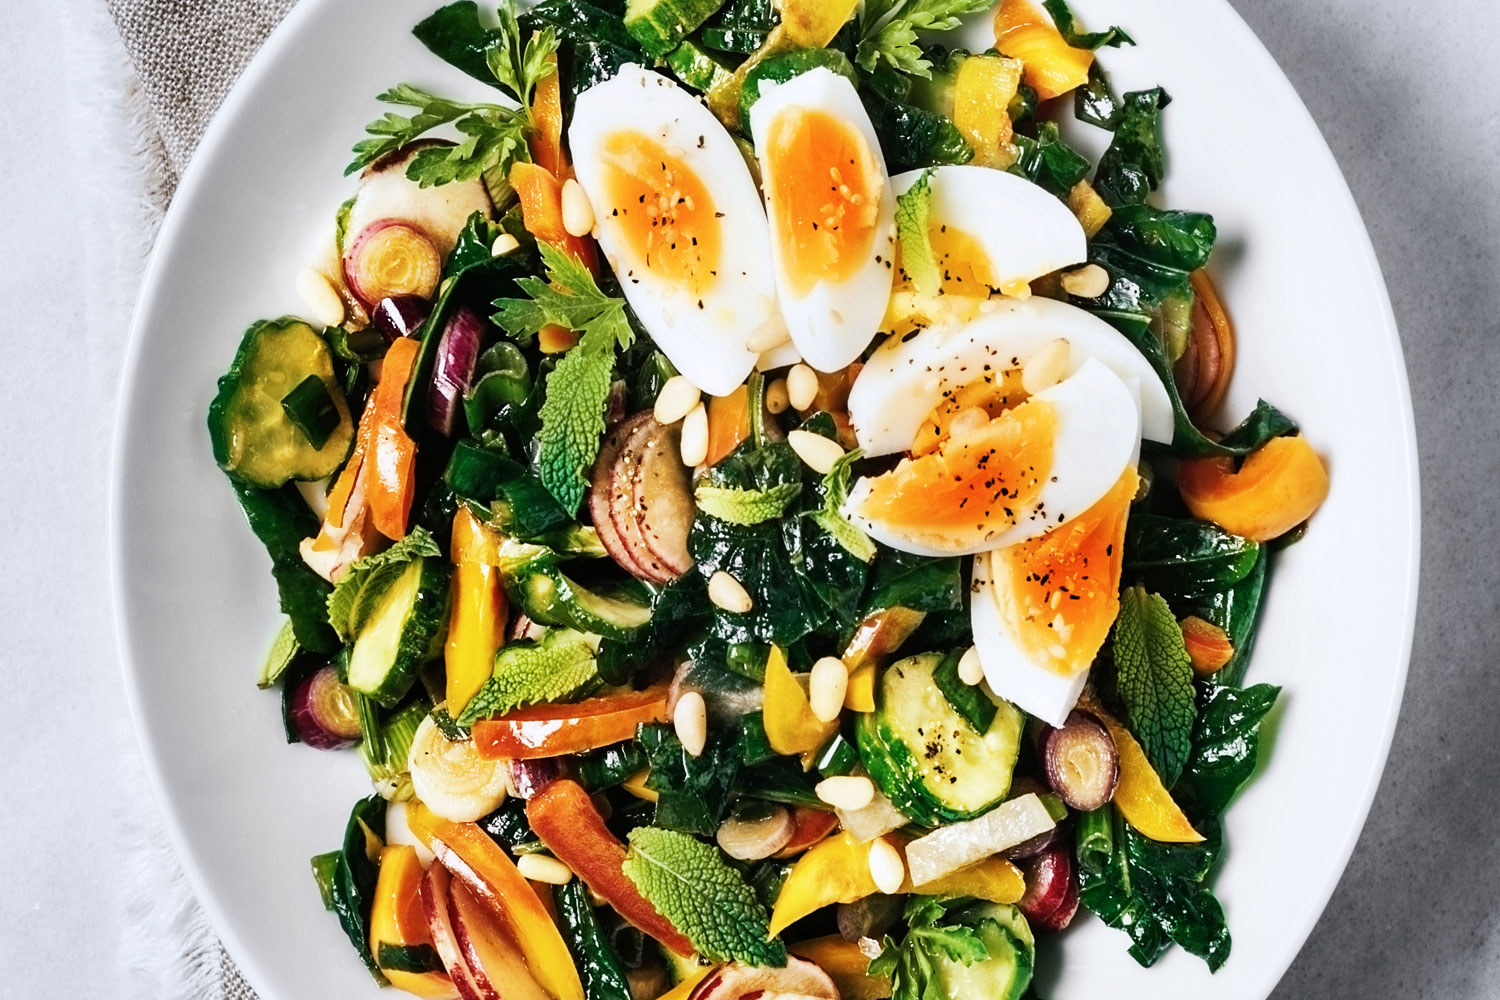 A vegetarian salad with eggs and lots of veggies.